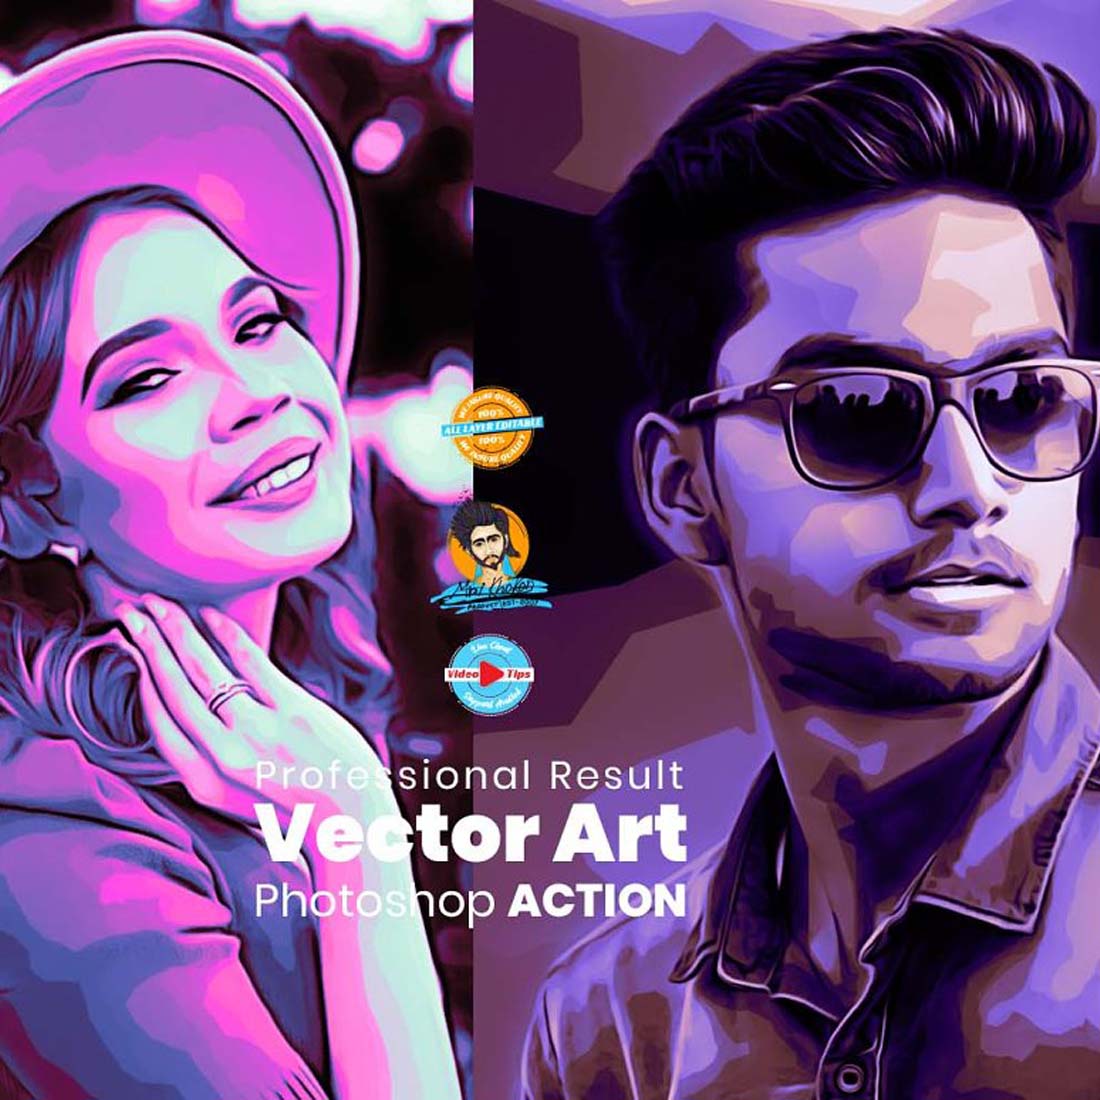 Vector Art Photoshop Action cover image.